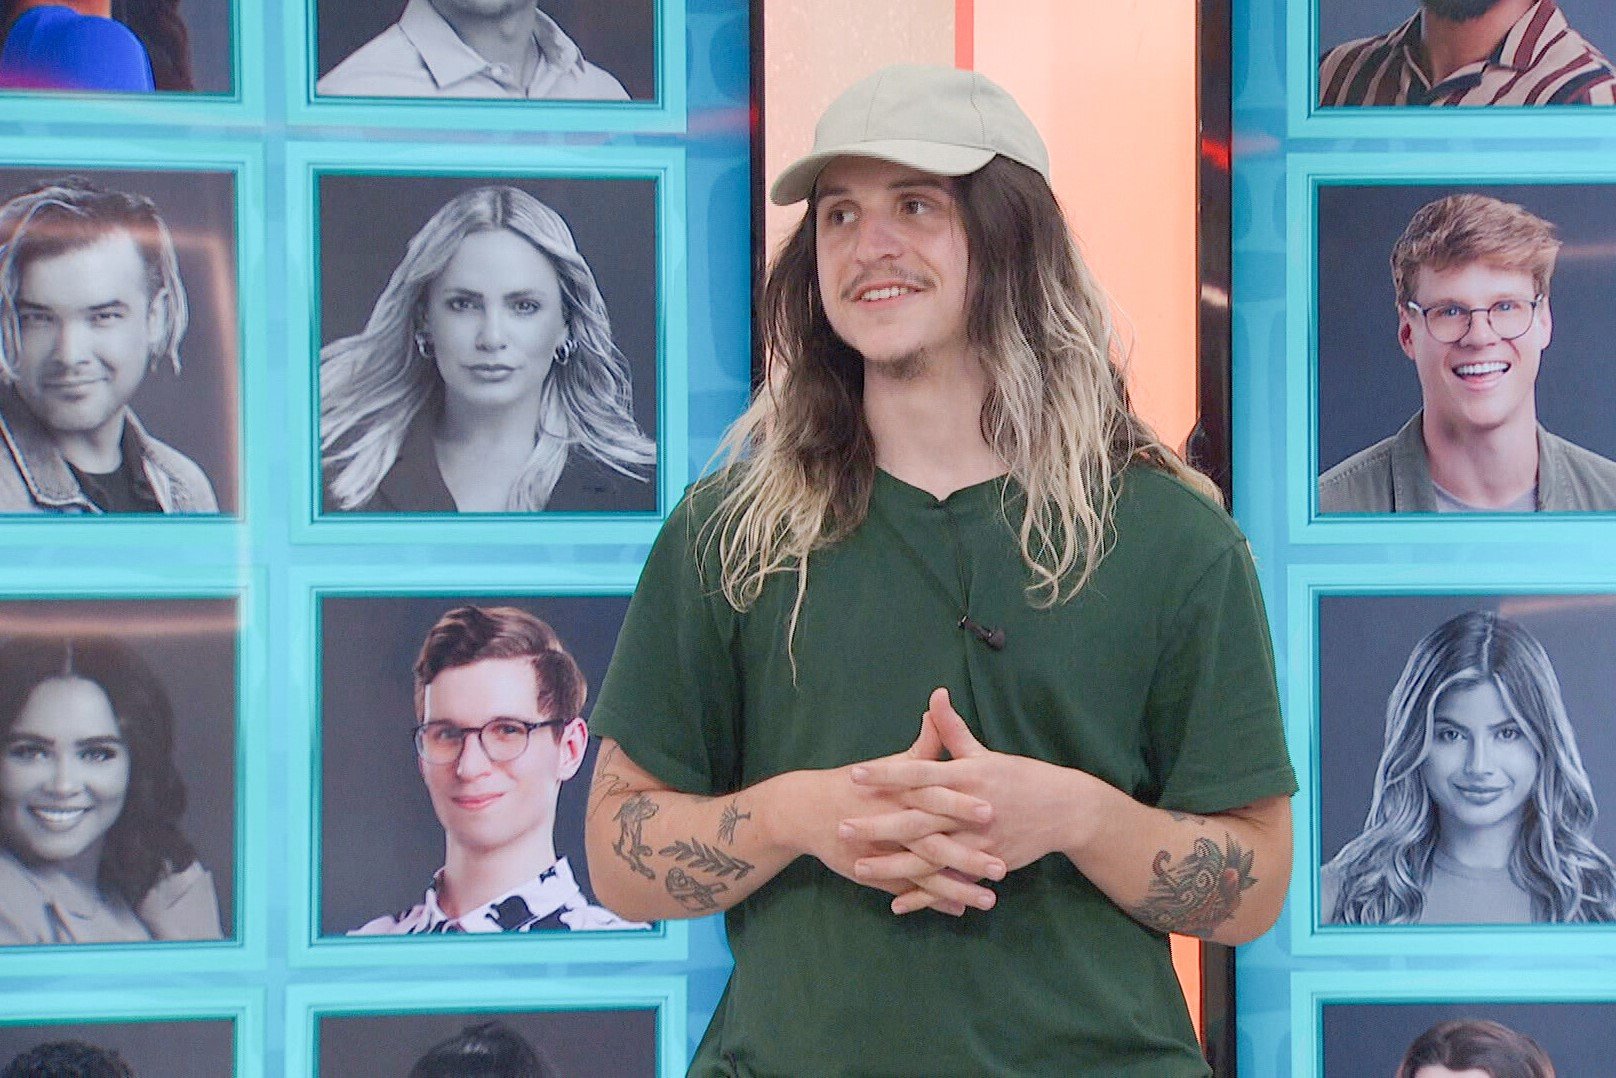 Matthew Turner, who, according to 'Big Brother 24' spoilers, will nominate Kyle Capener for eviction, wears a green shirt and tan baseball cap.